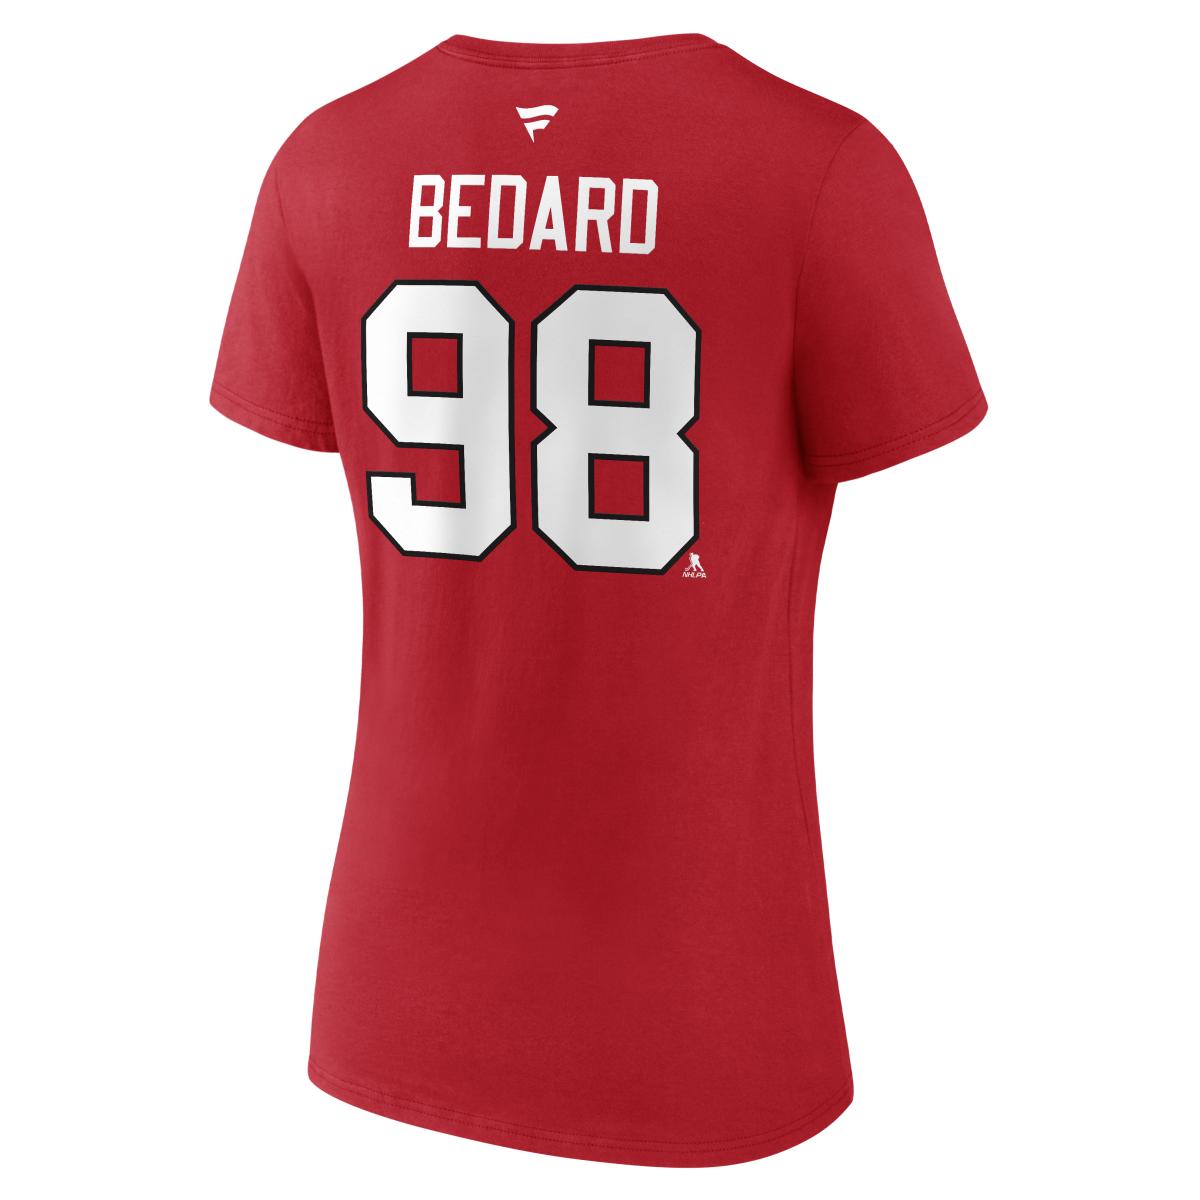 Bedard Women's Authentic Stack SS Red Tee - $34.99